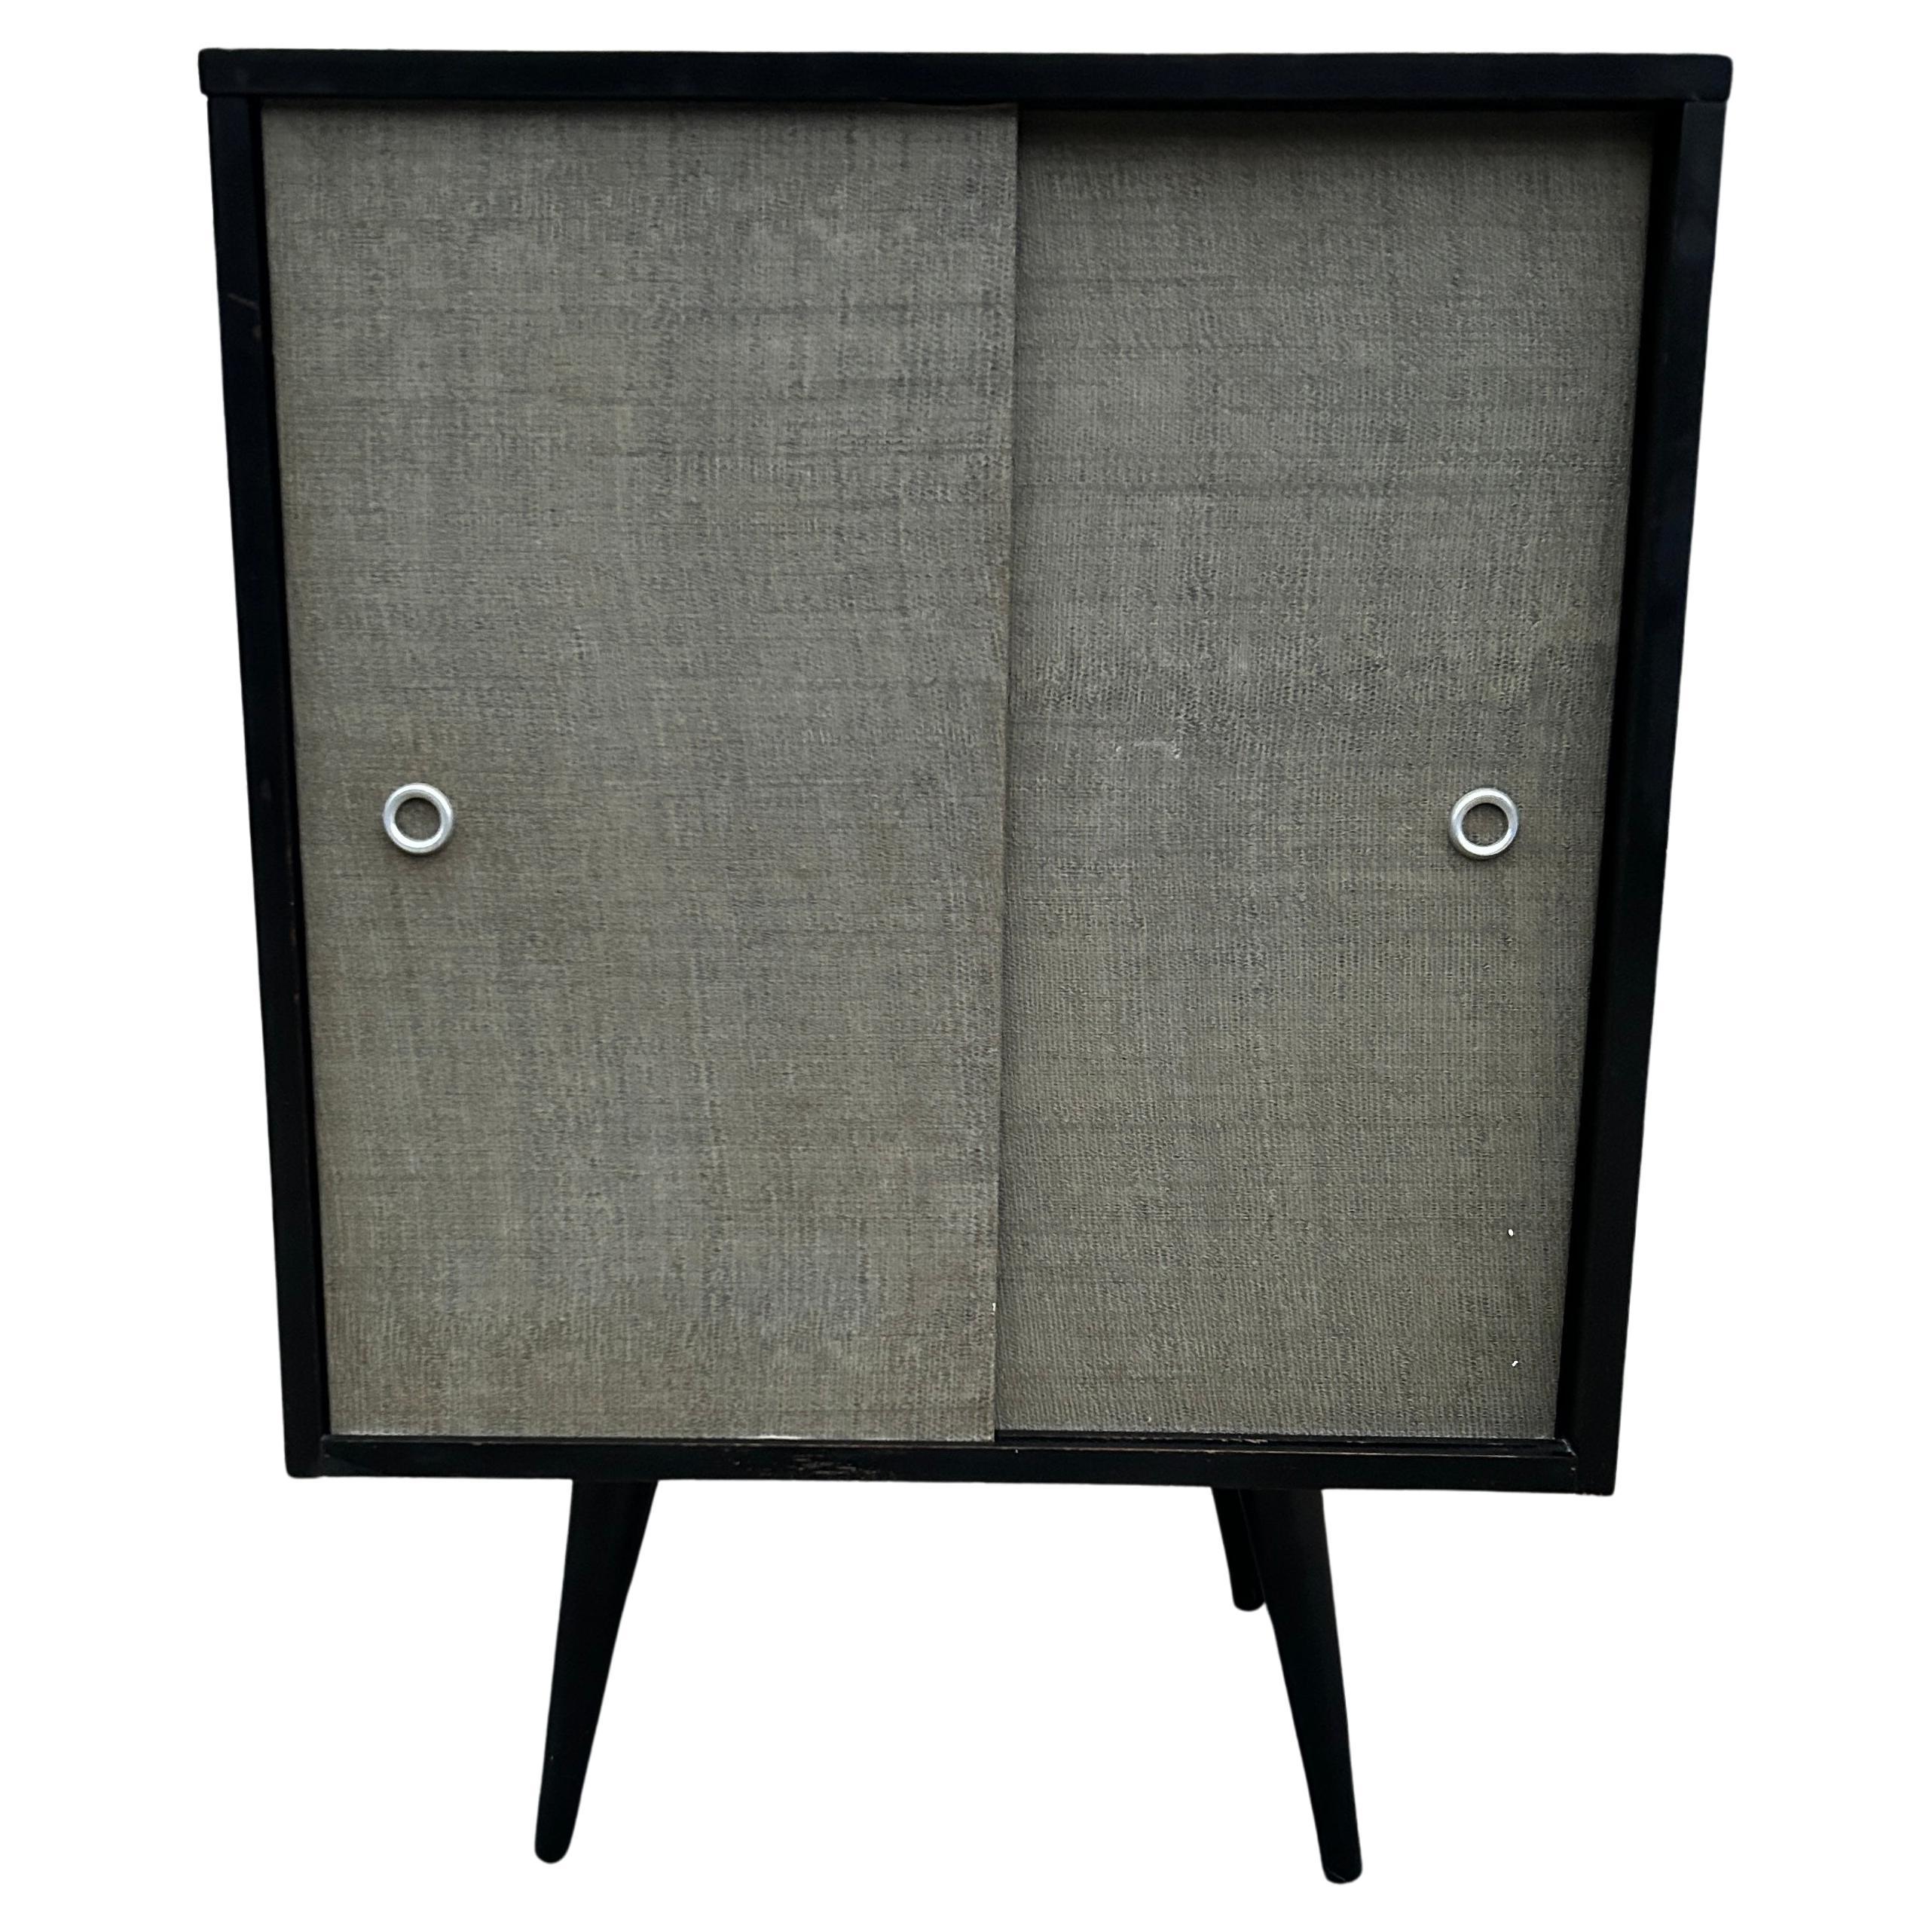 Mid-Century Small Cabinet by Paul McCobb circa 1950 Planner Group #1512 Black